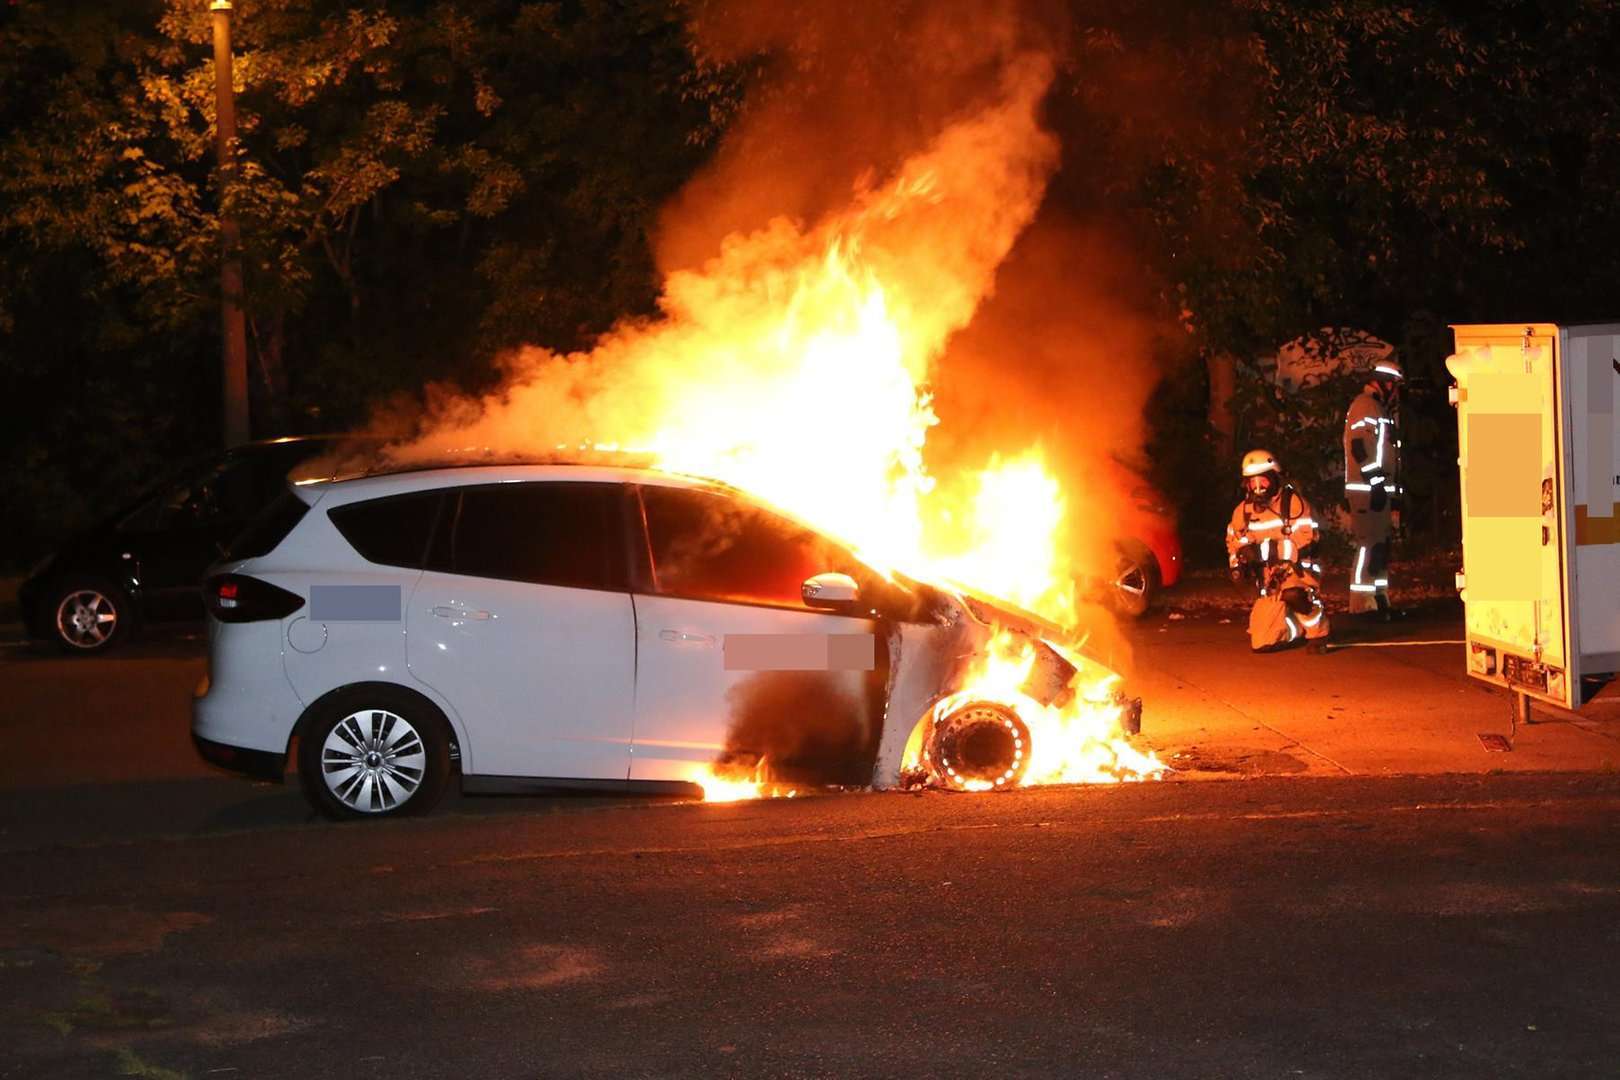 Germany: Car Belonging to Police and Military Supplier Dräger Torched in Berlin